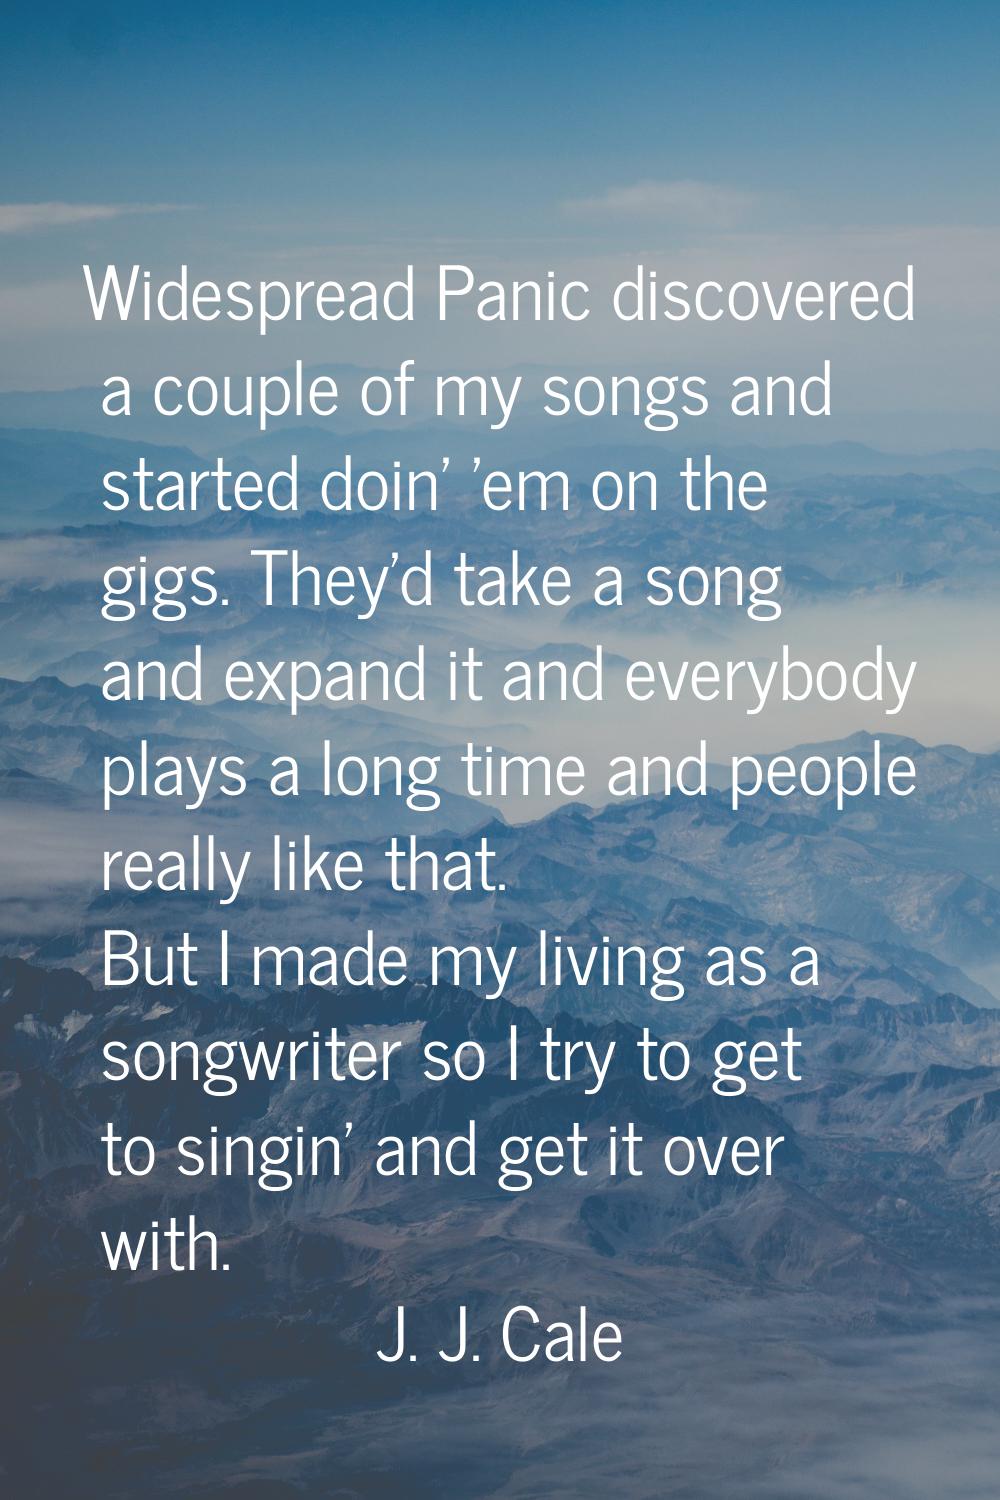 Widespread Panic discovered a couple of my songs and started doin' 'em on the gigs. They'd take a s